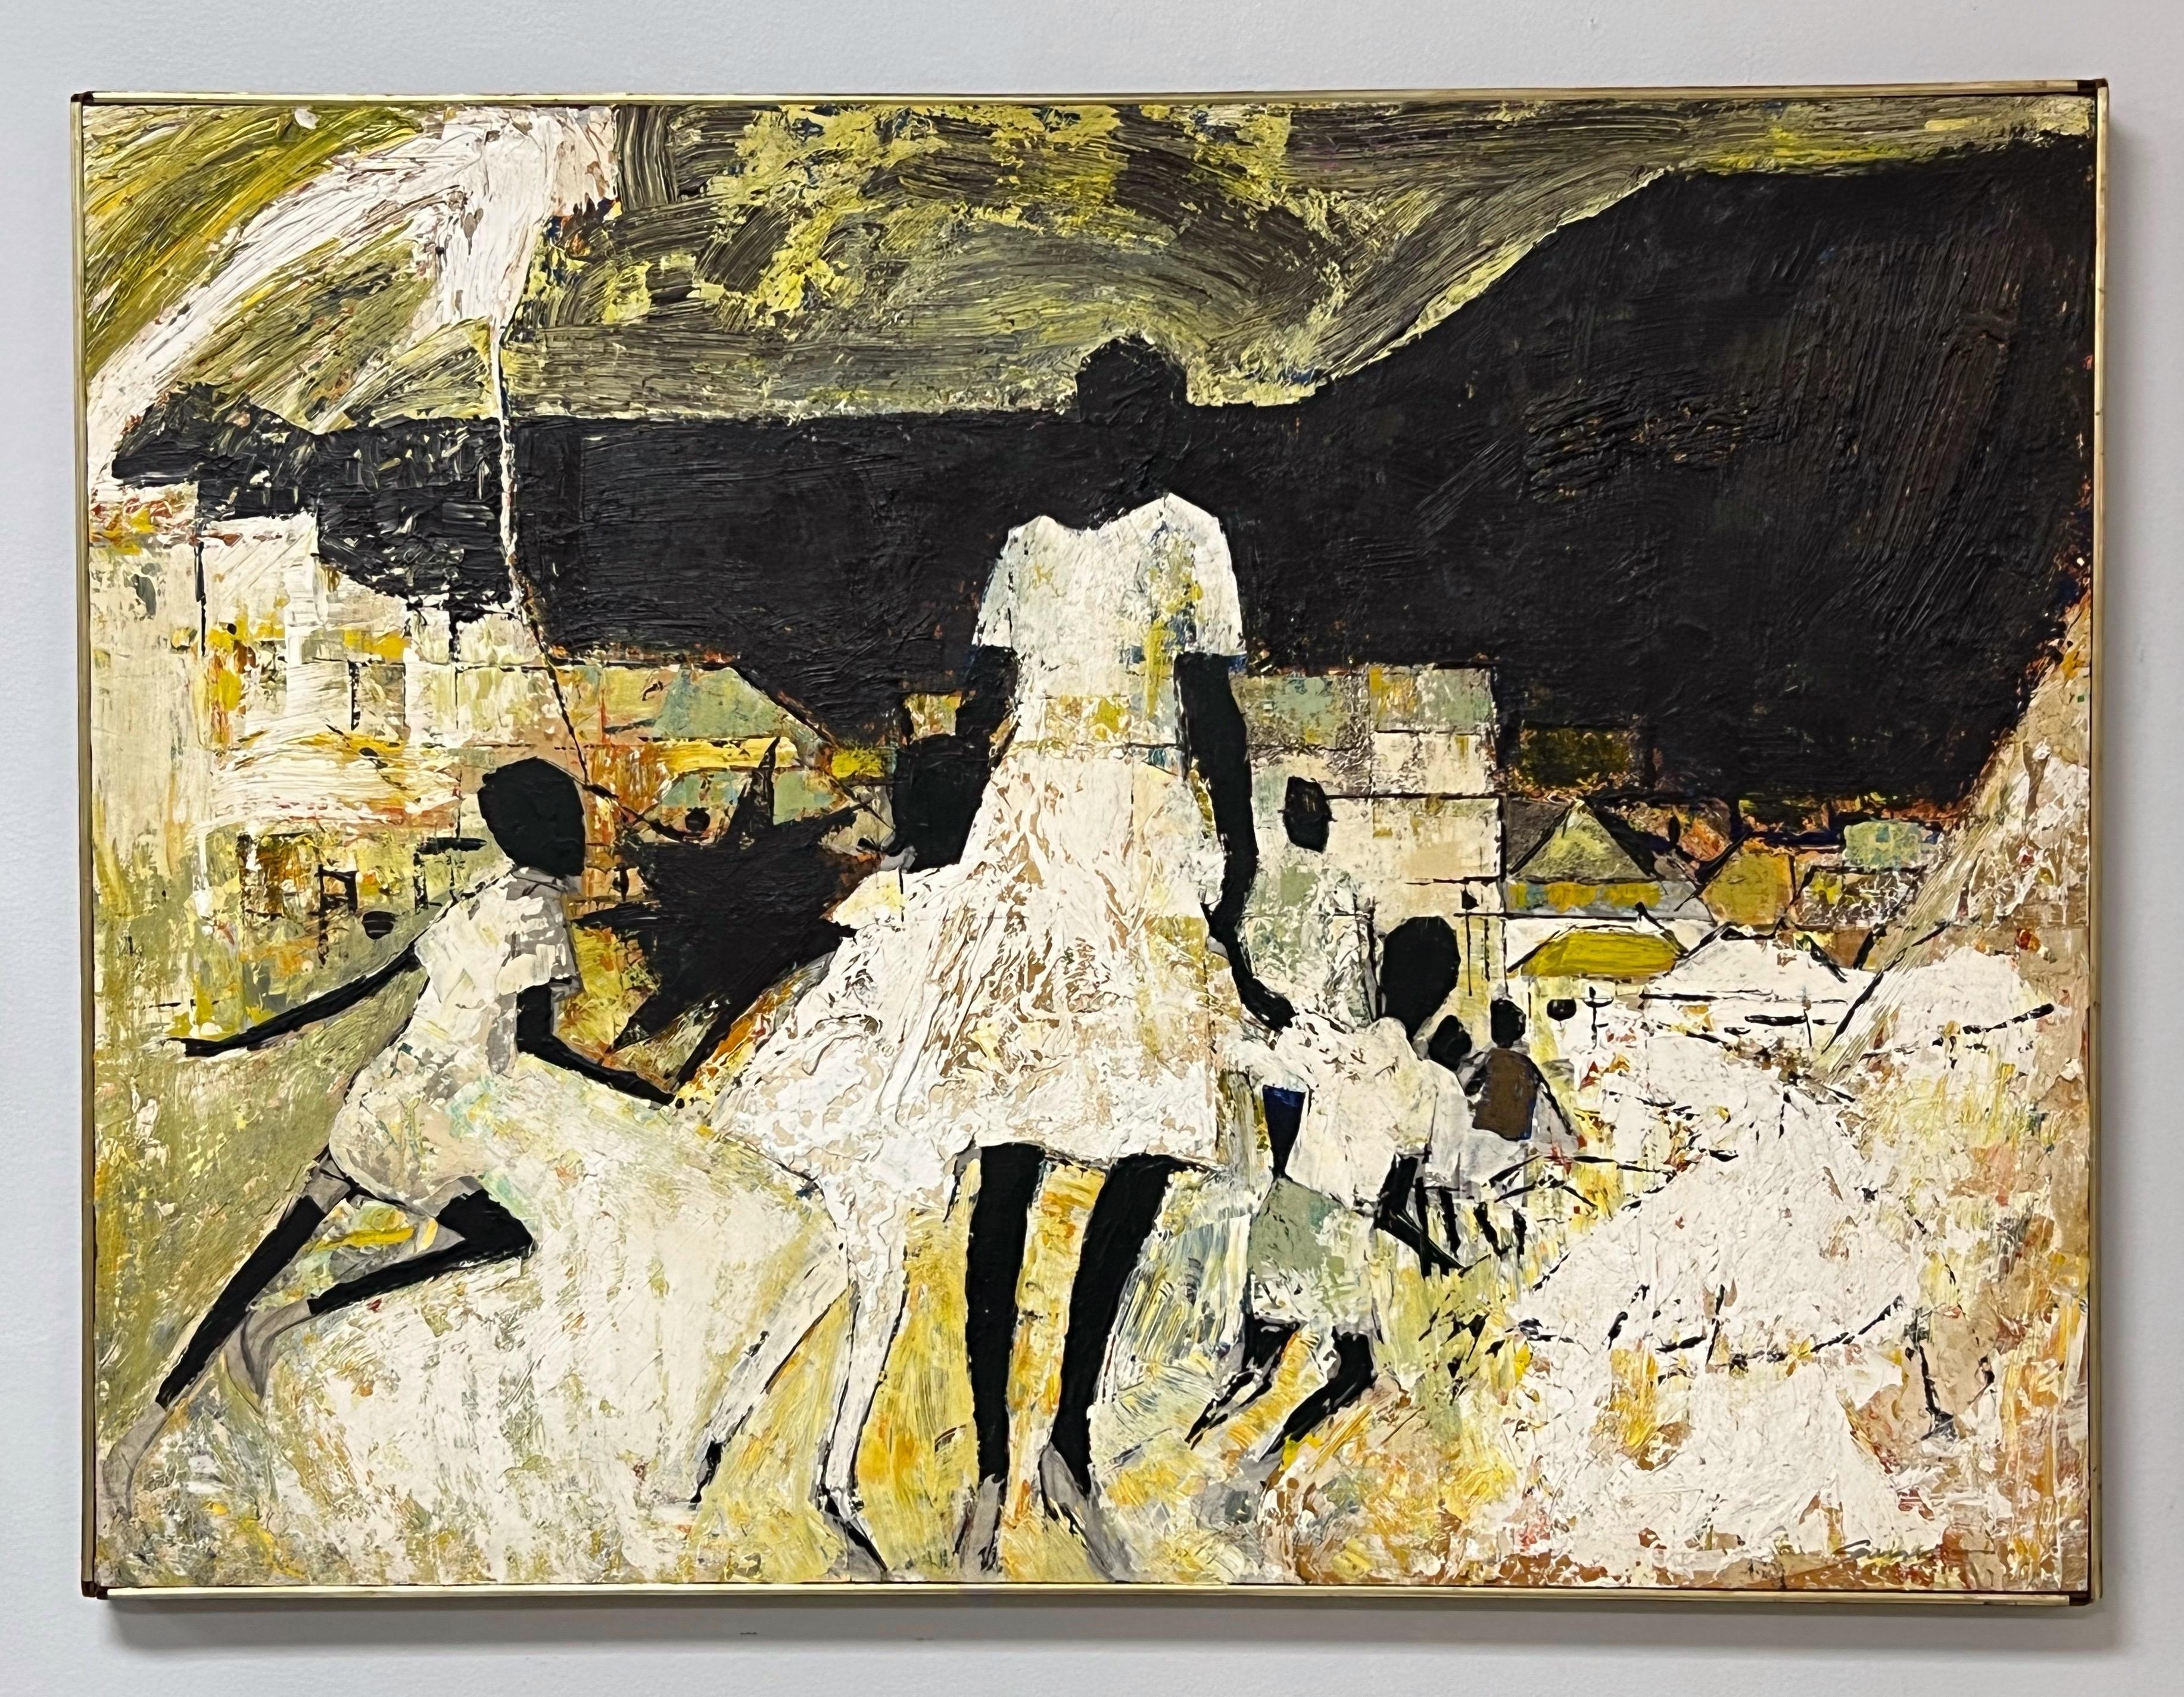 Oil on board by Wilson L. Scruggs. A large format painting done in a modern style with subtle collage and sensitive yet bold impasto passages. Mr. Scruggs was active in the Miami and The Bahamas, this particular work along with 2 more being offered